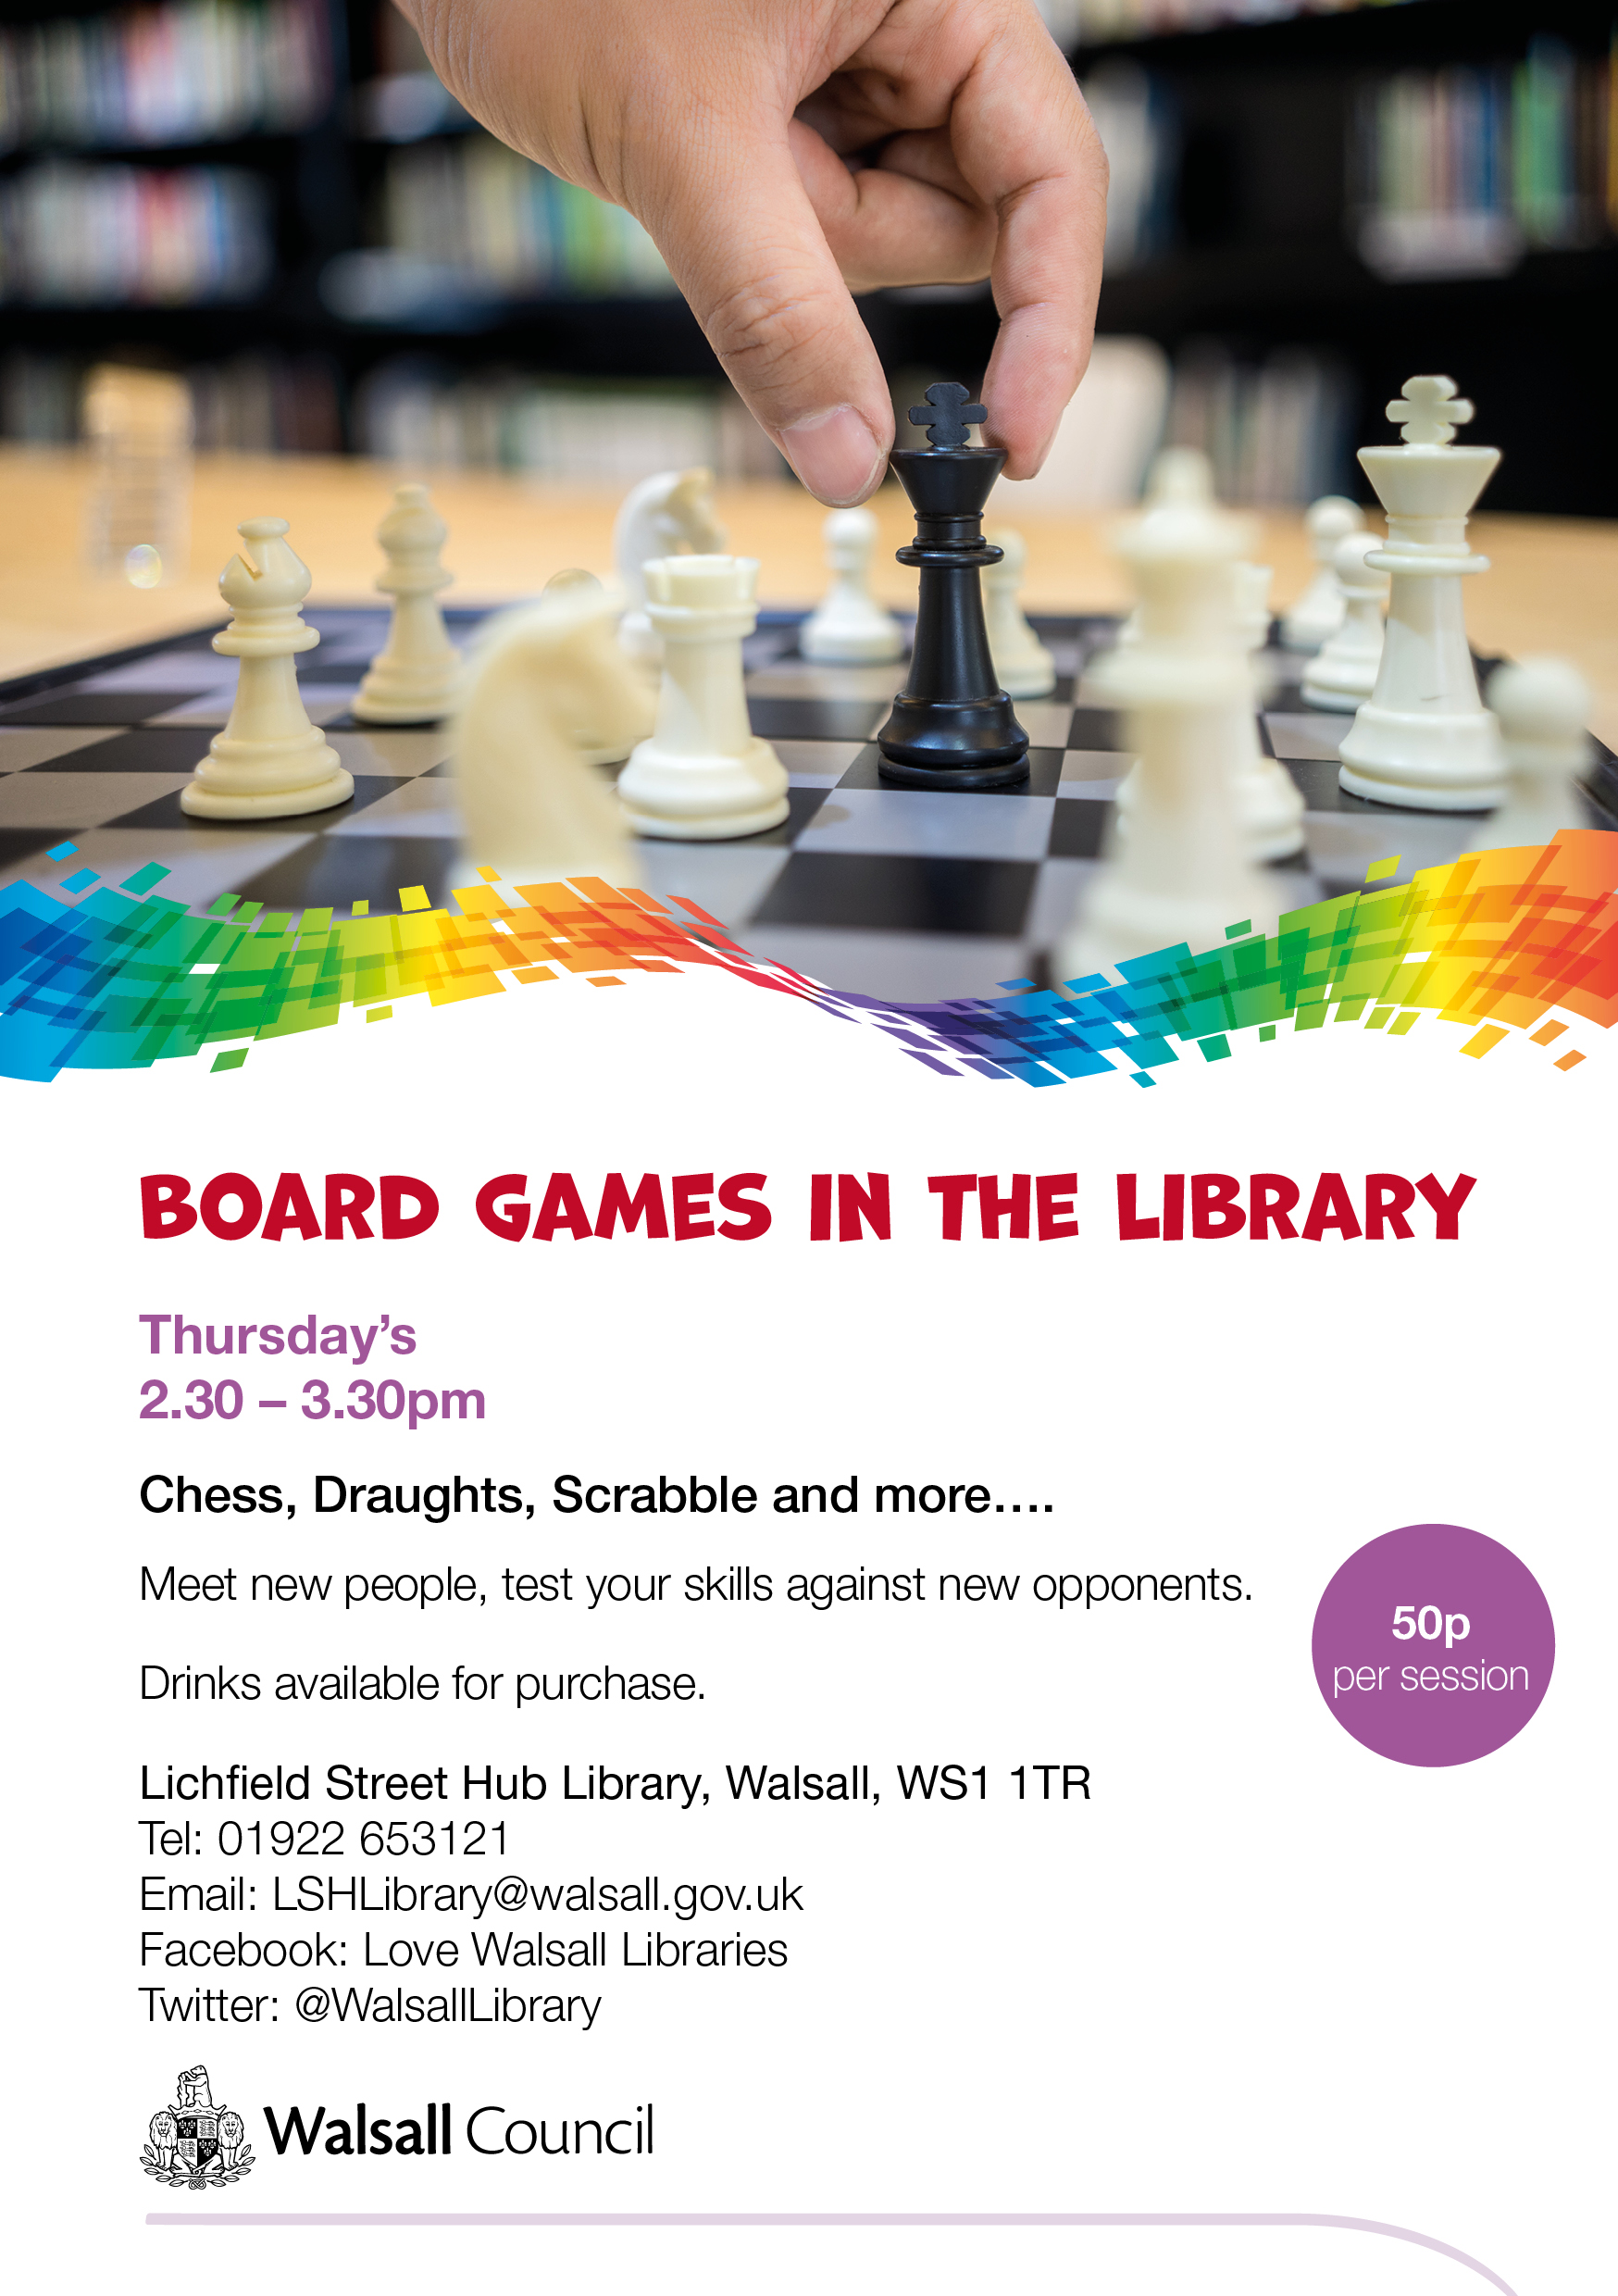 Flyer for board games in the library